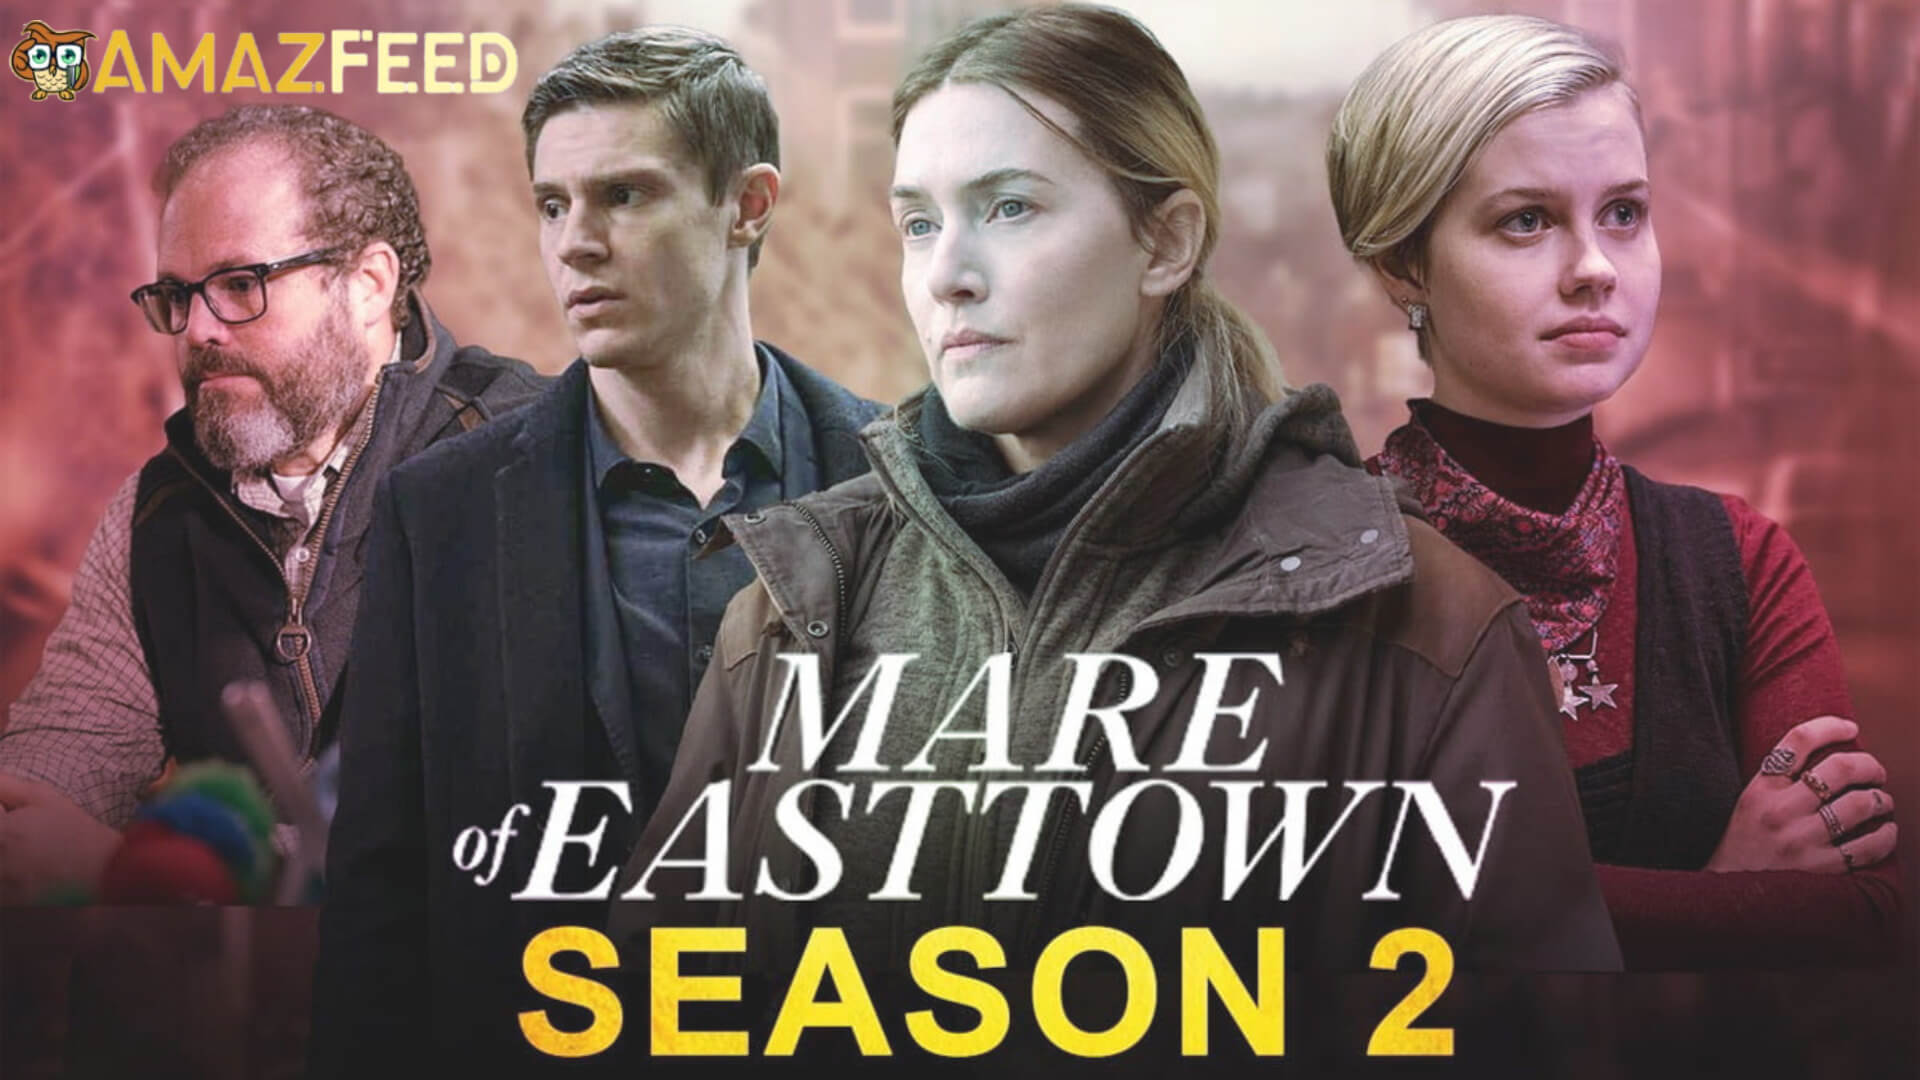 When Is Mare of Easttown Season 2 Coming Out (Release Date)